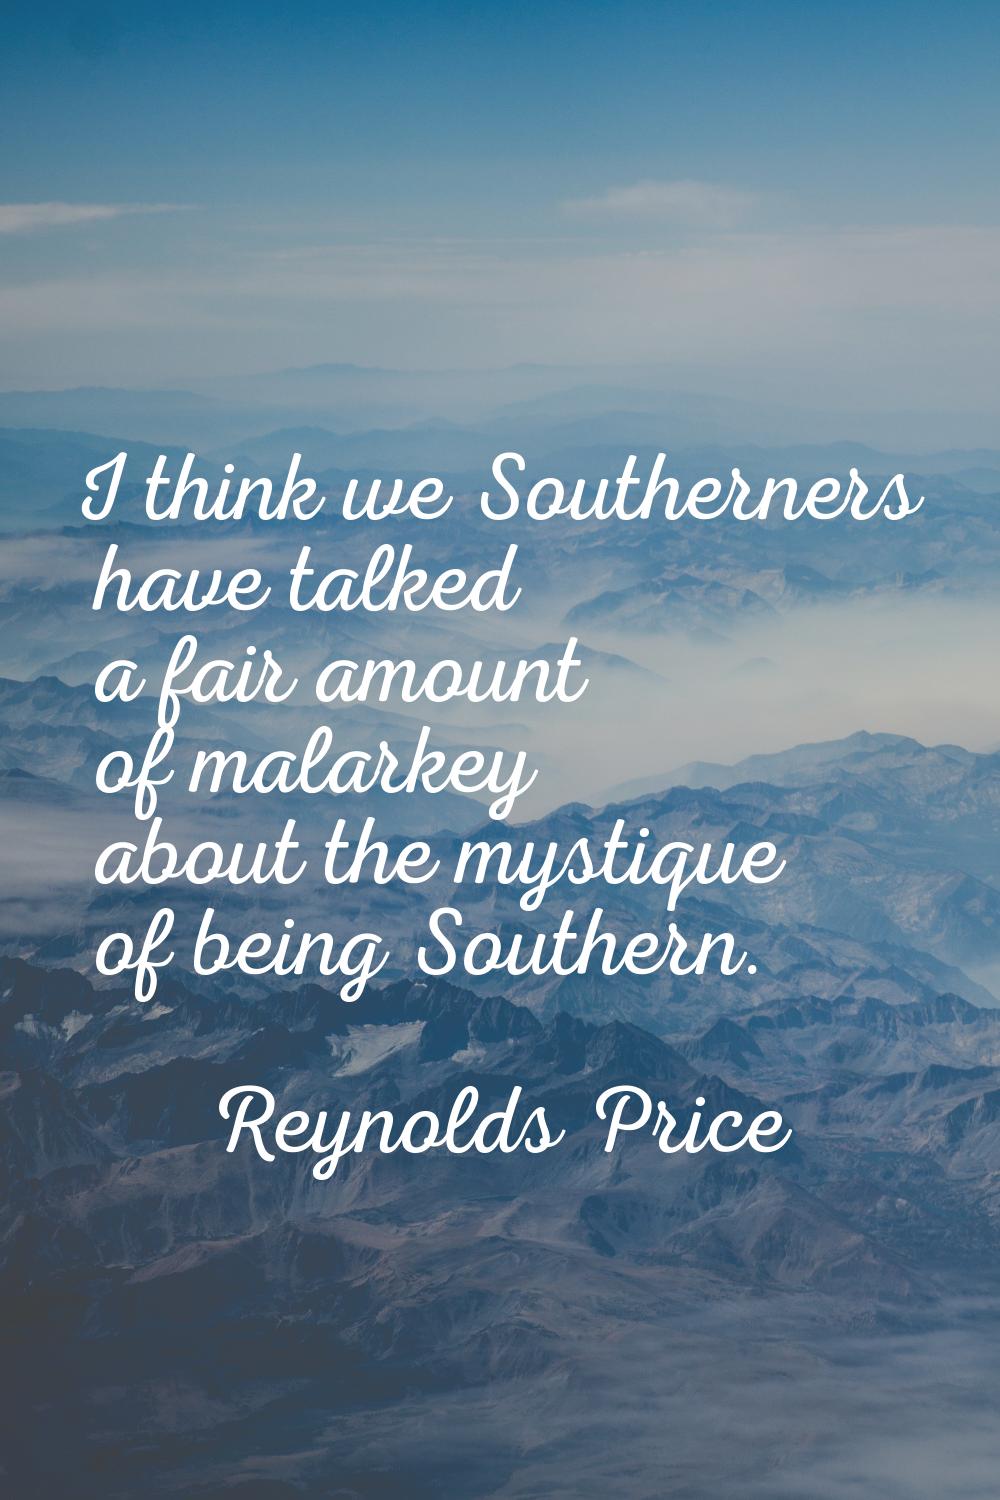 I think we Southerners have talked a fair amount of malarkey about the mystique of being Southern.